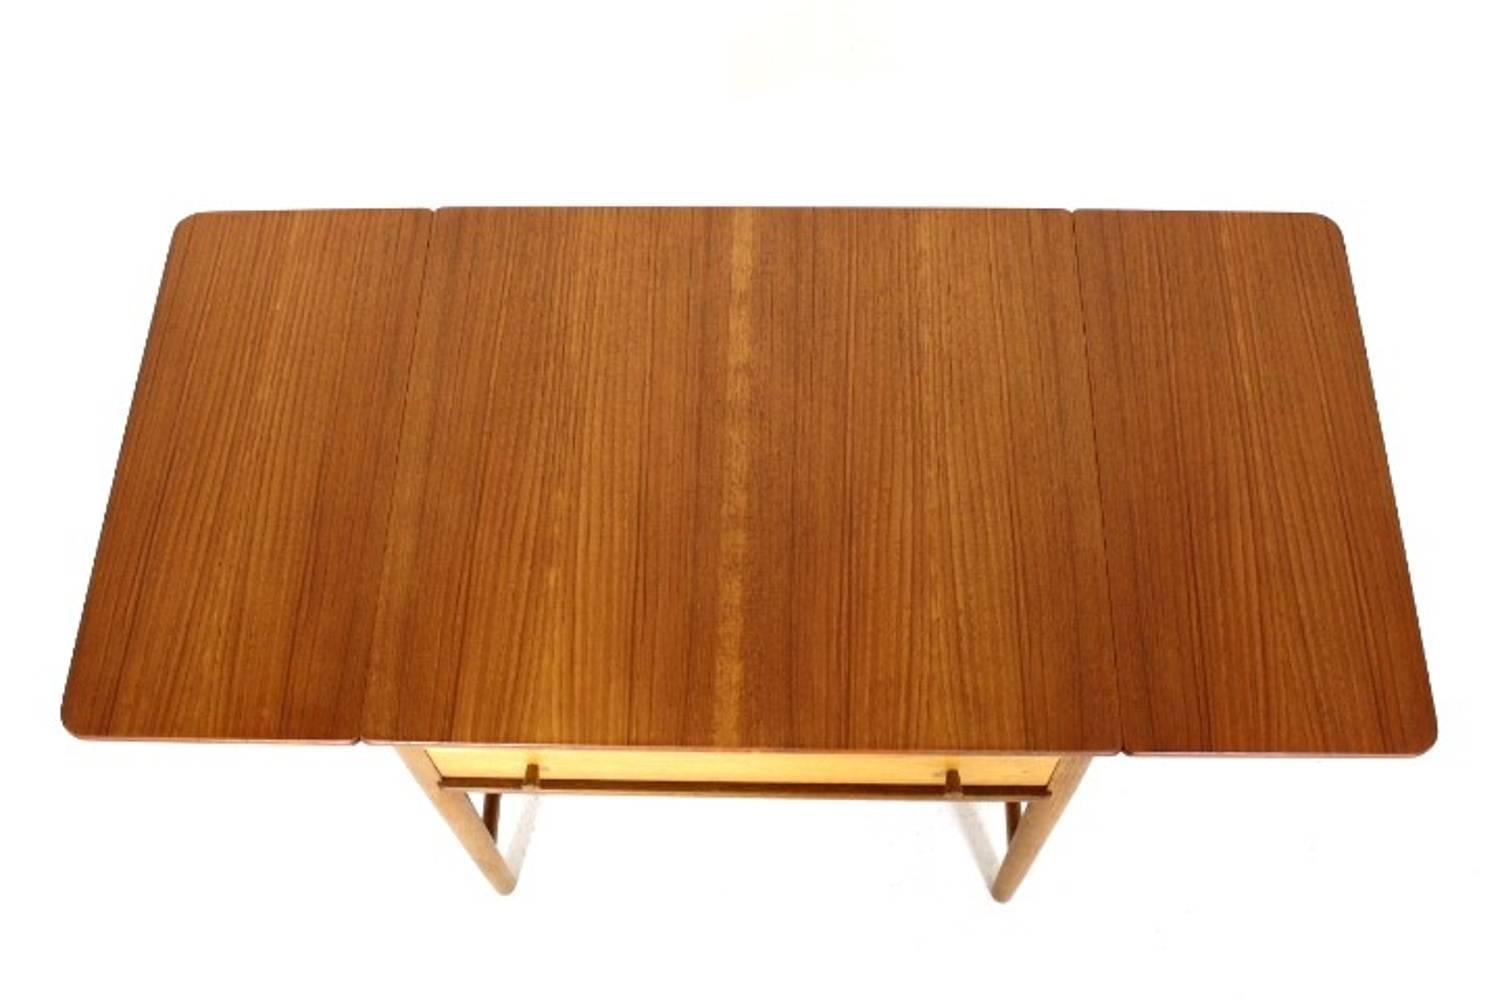 Scandinavian Modern Sewing Table in Teak and Oak by Hans J. Wegner, for Andreas Tuck, Model AT-33 For Sale